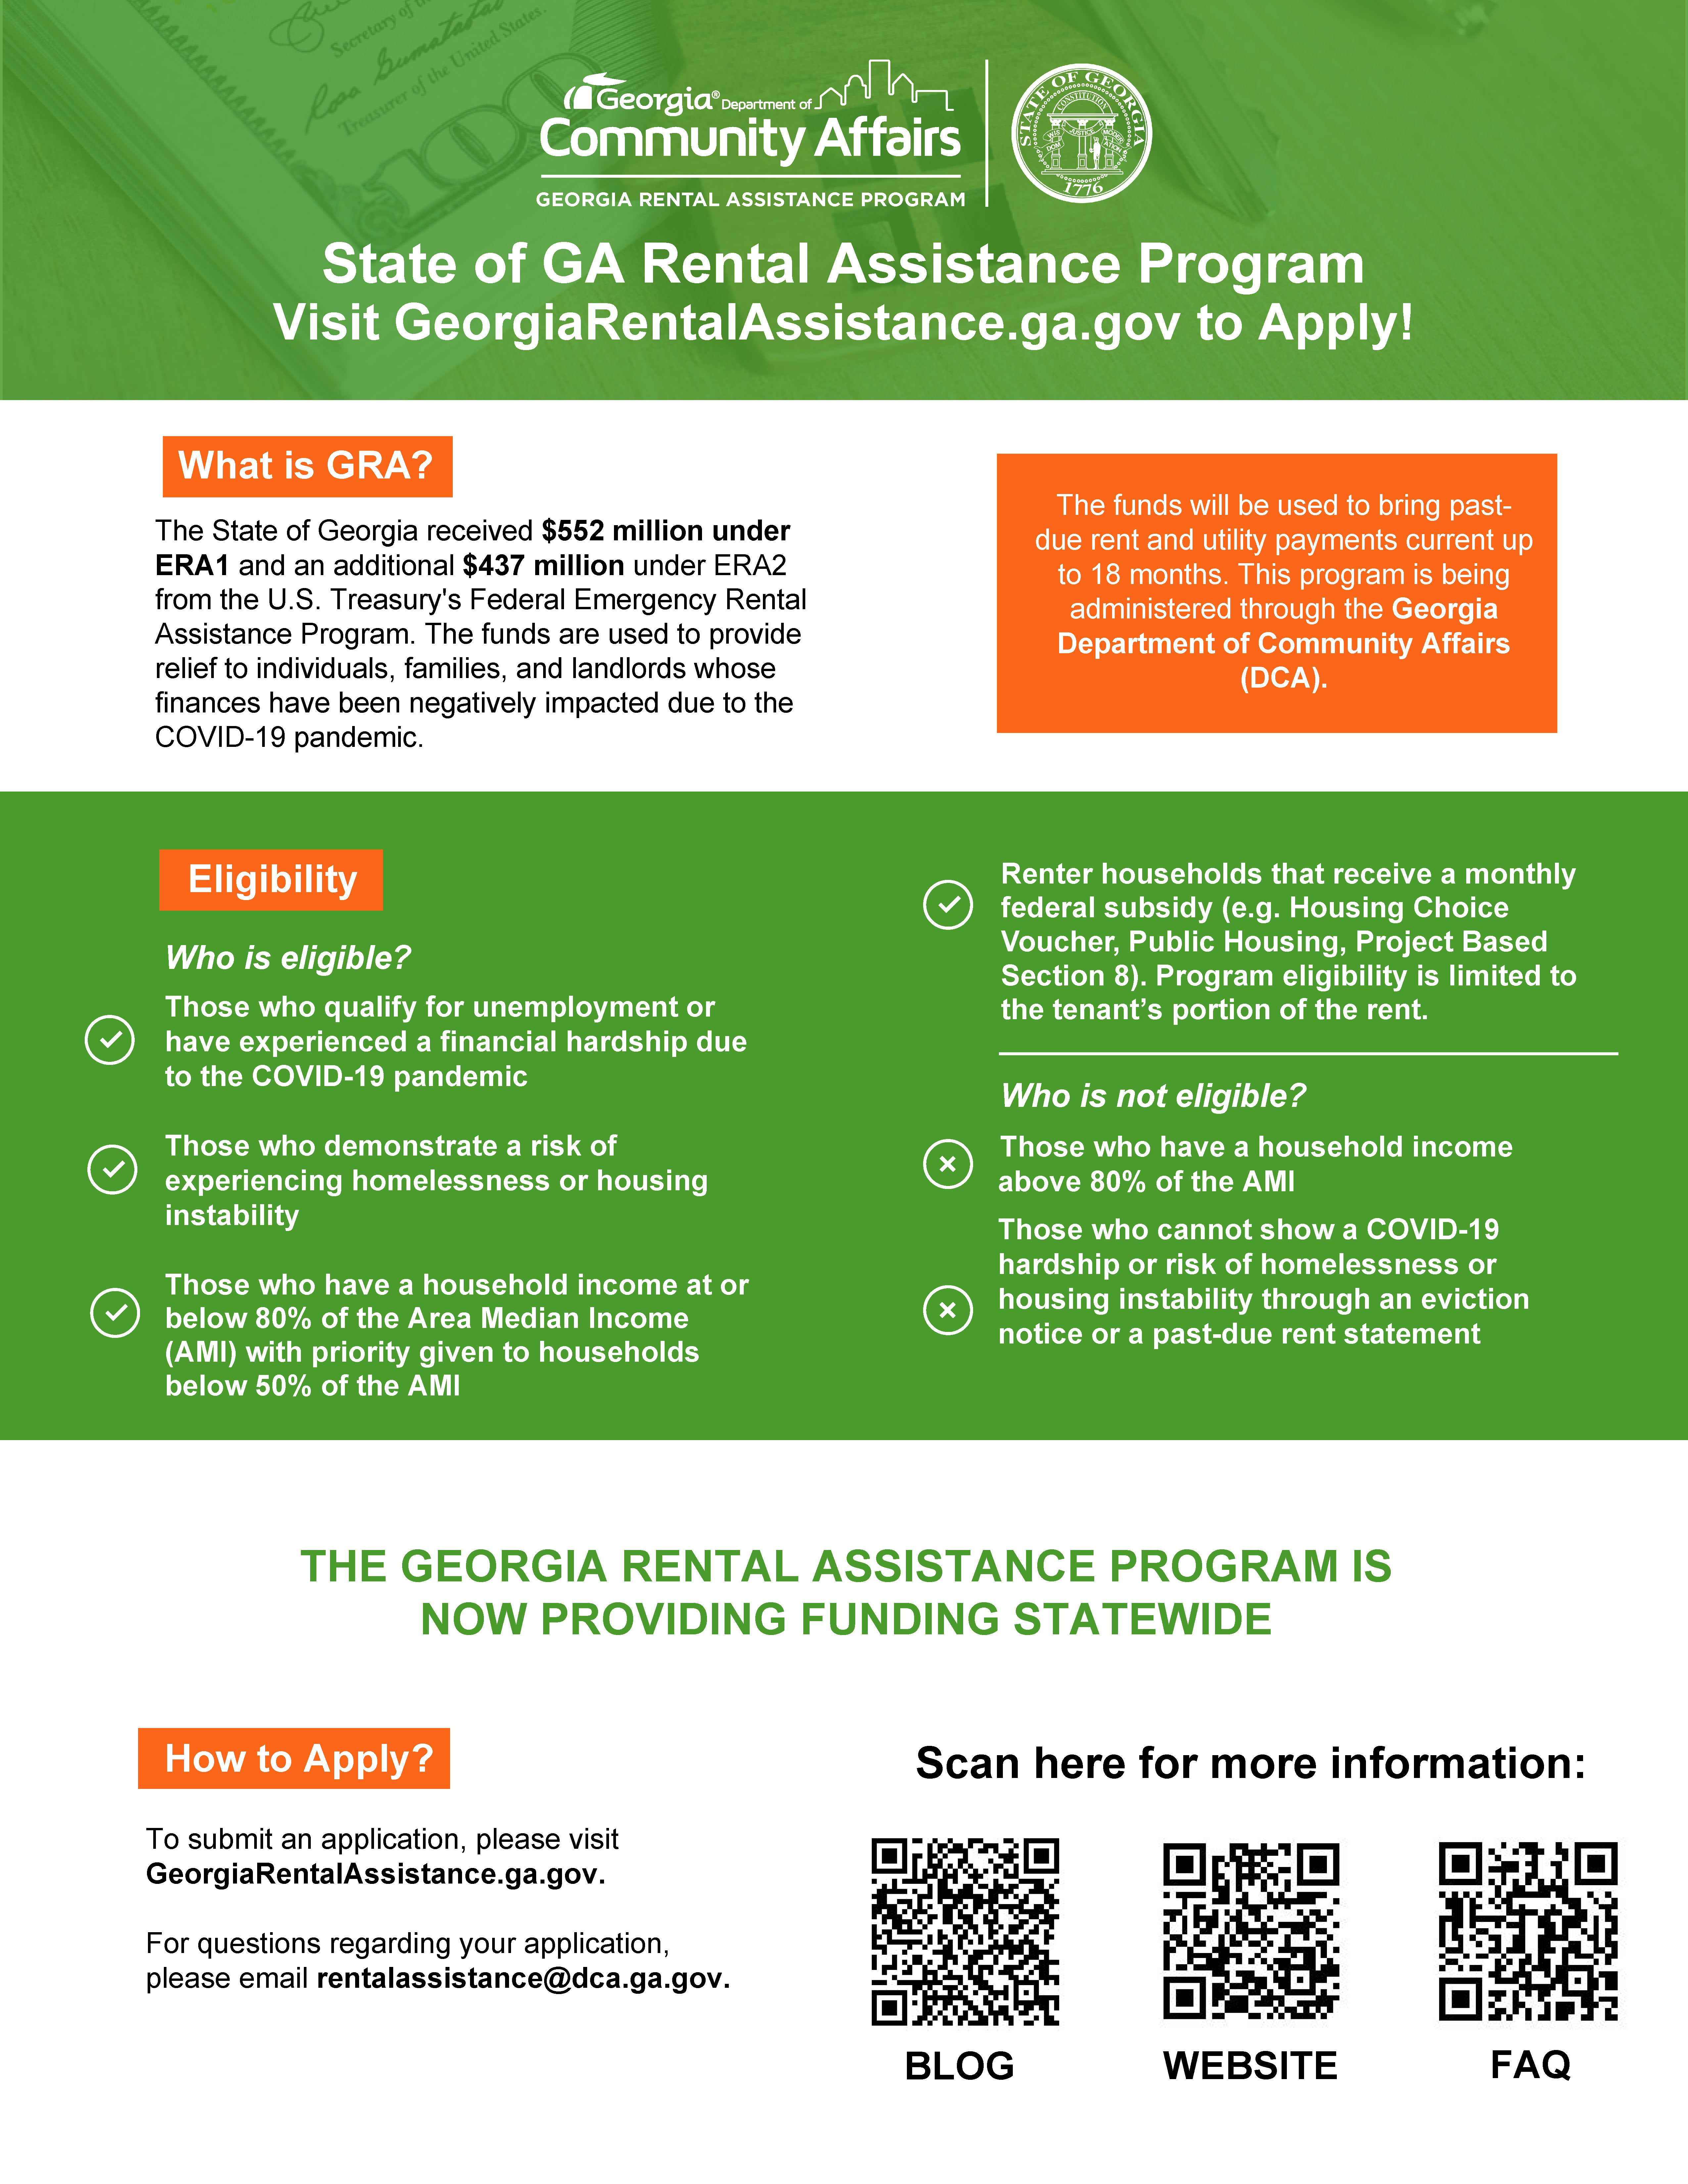 Infographic describing the state of GA Rental Assistance